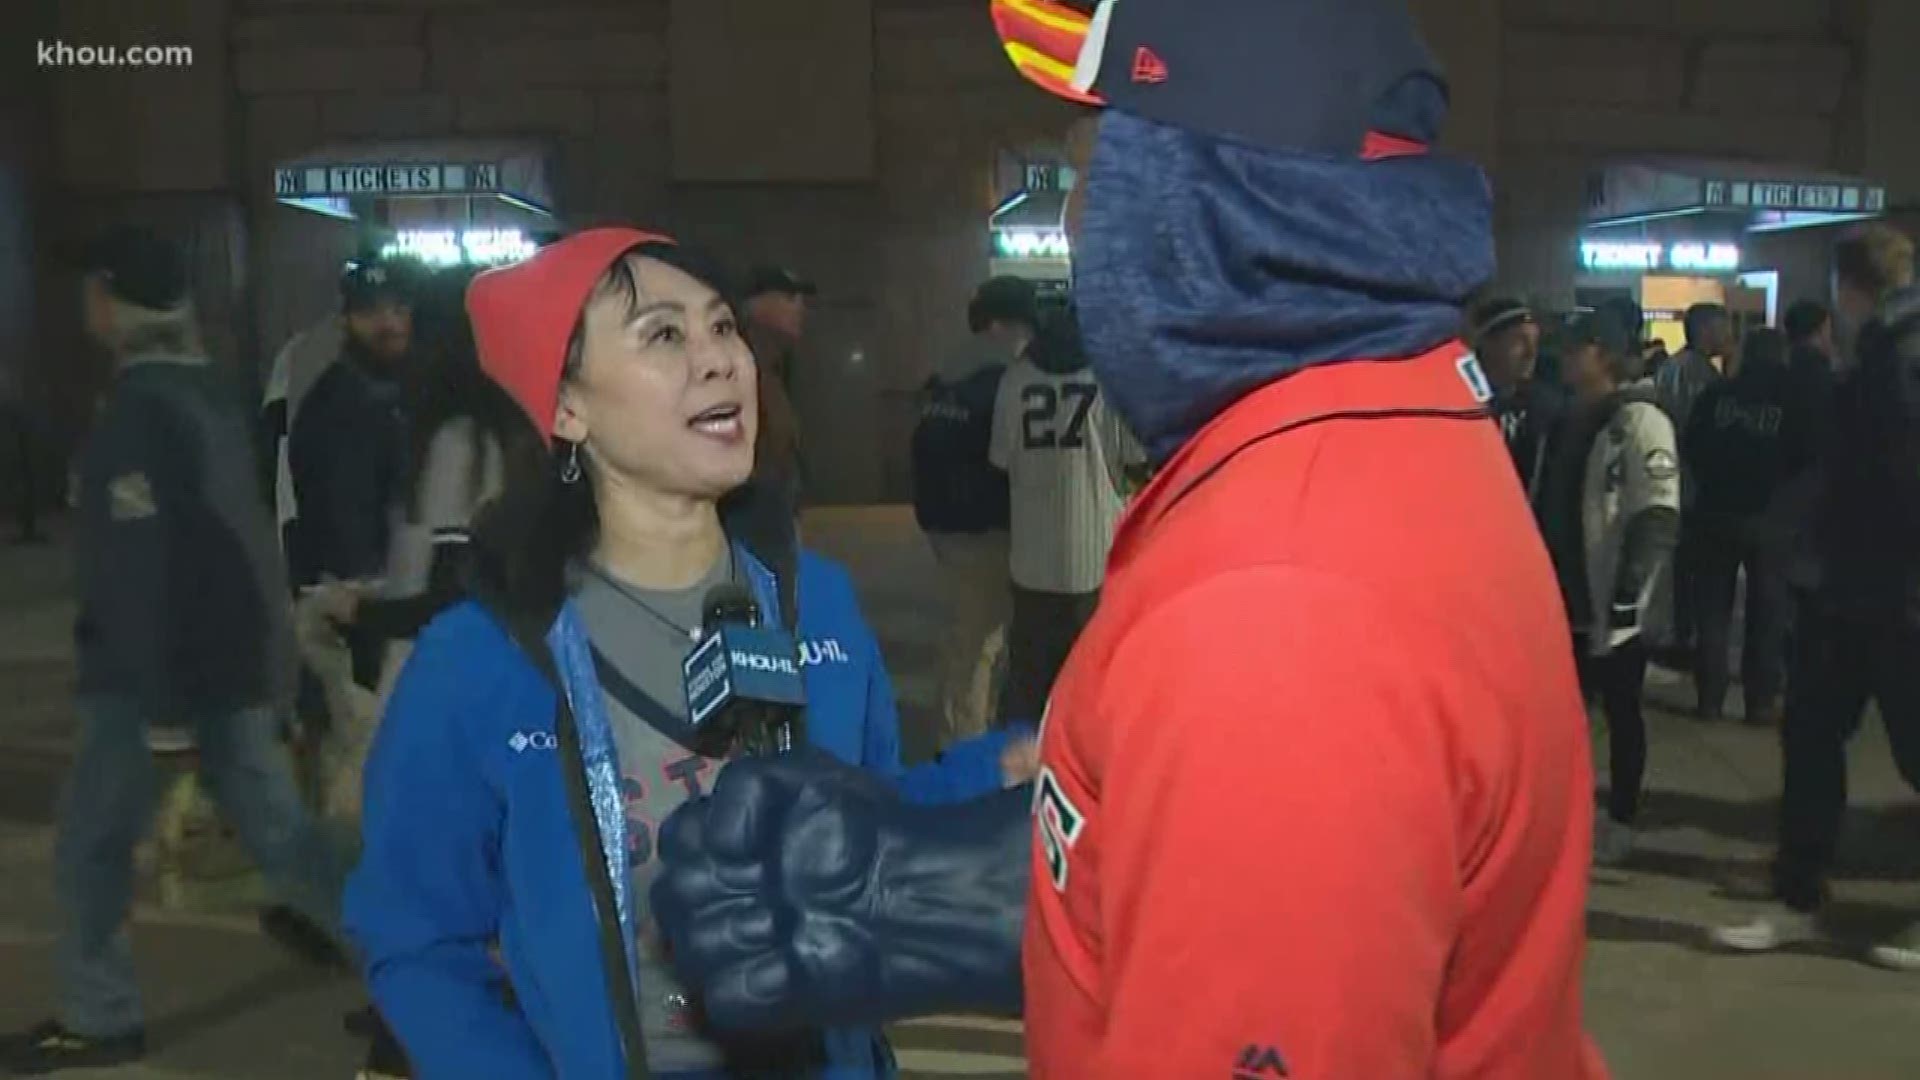 KHOU 11's Larry Seward found anchor Shern-Min Chow before the Astros took on the Yankees Thursday night in Game 4 of the ALCS.